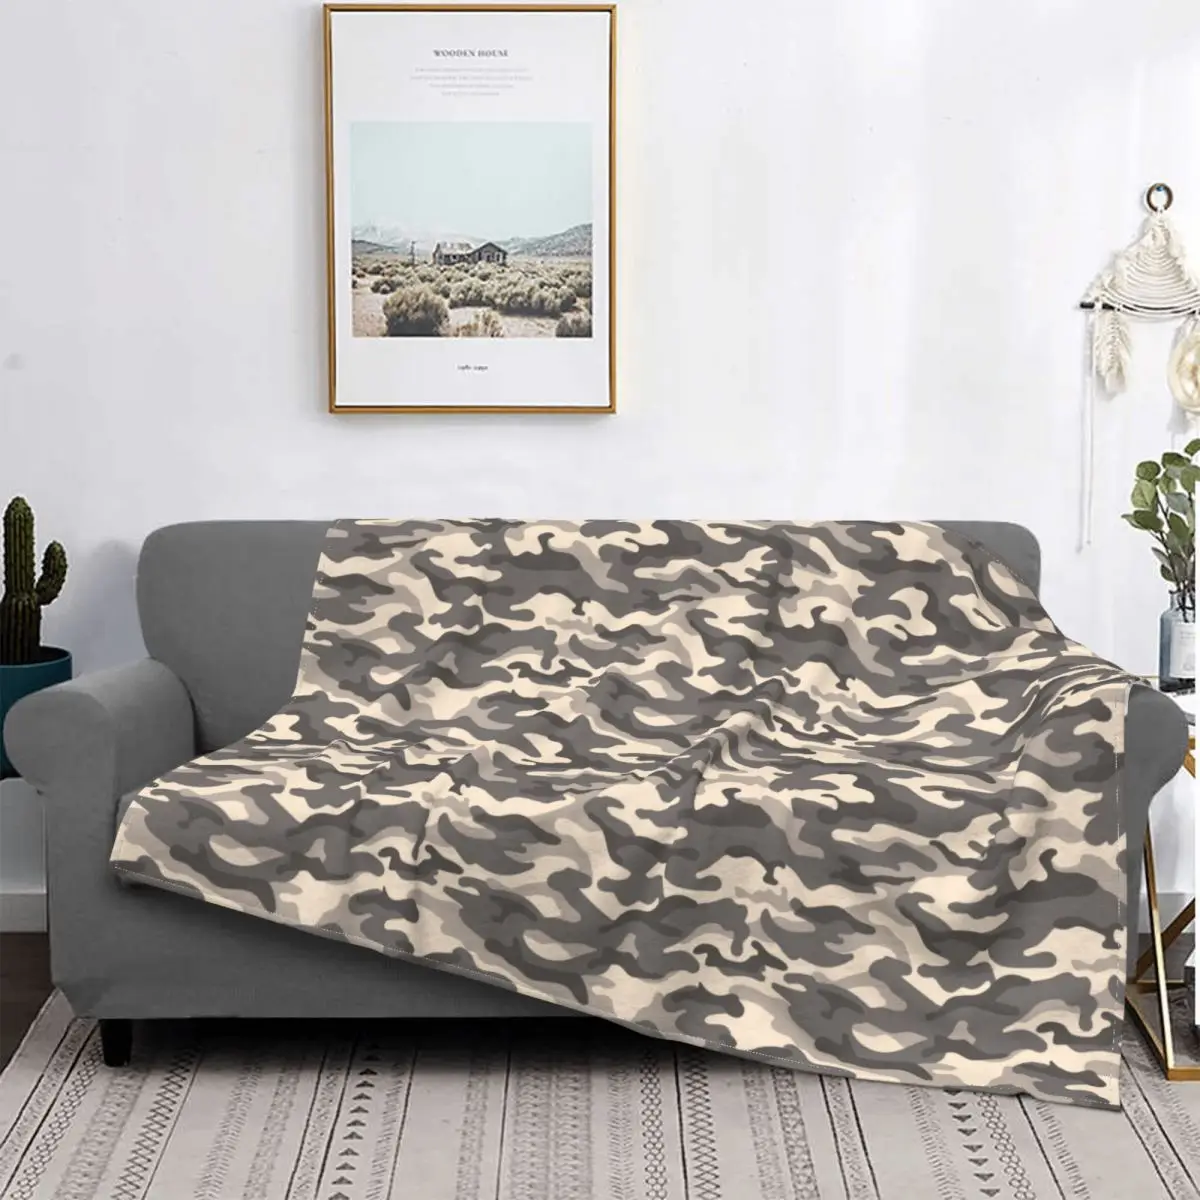 

Russian Woodland Camouflage Blankets Fleece Autumn/Winter Military Army Soft Throw Blankets for Bedding Office Bedding Throws